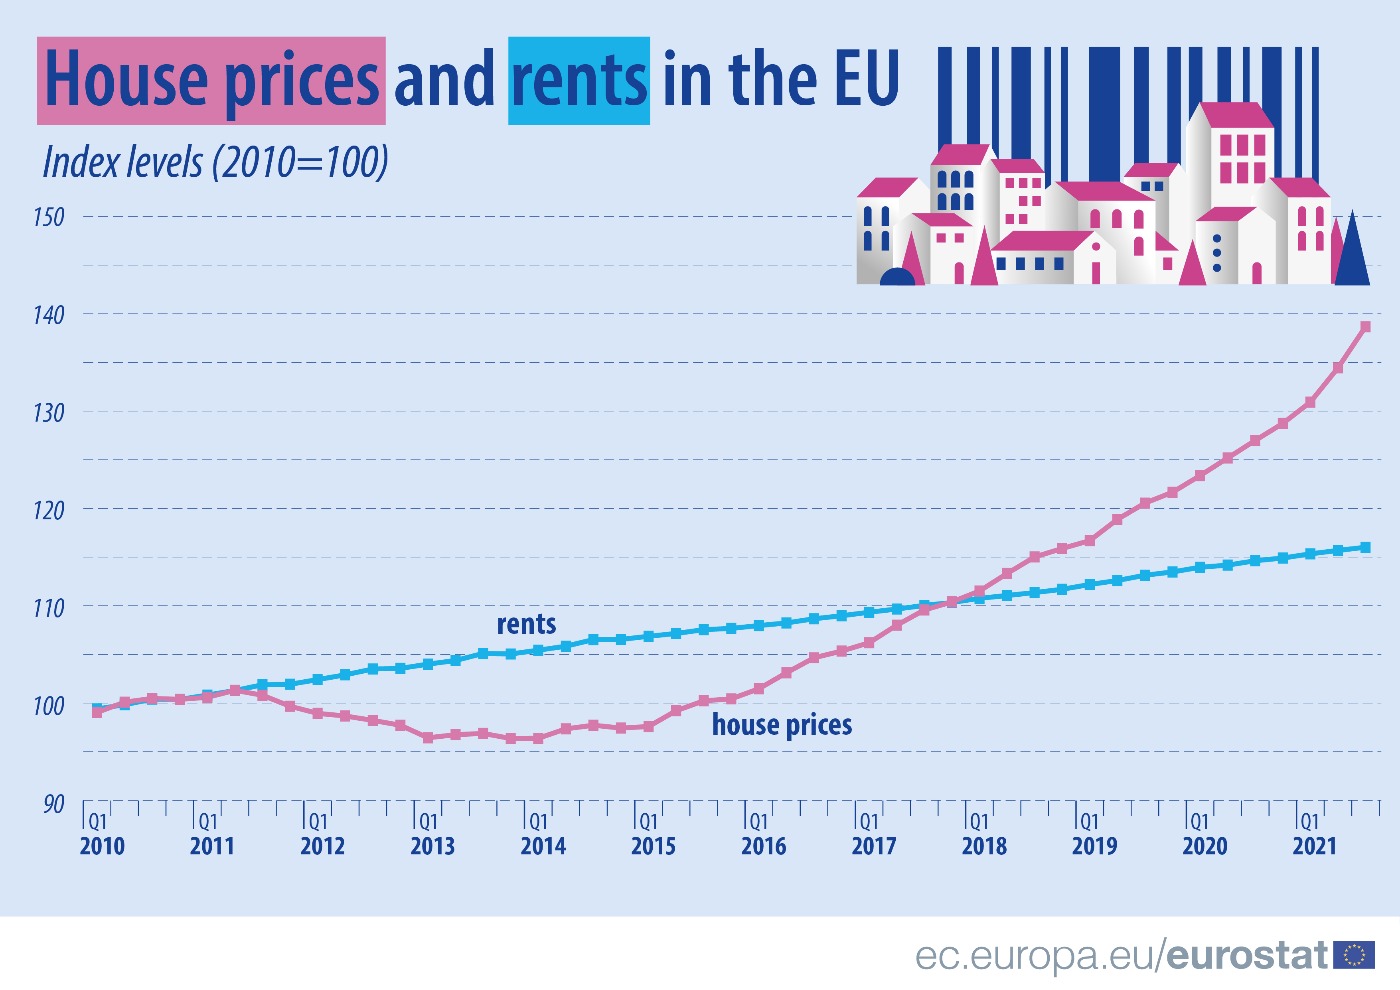 Line graph: House prices and rents in the EU, index levels 2010 = 100, from 2010 till Q3 2021